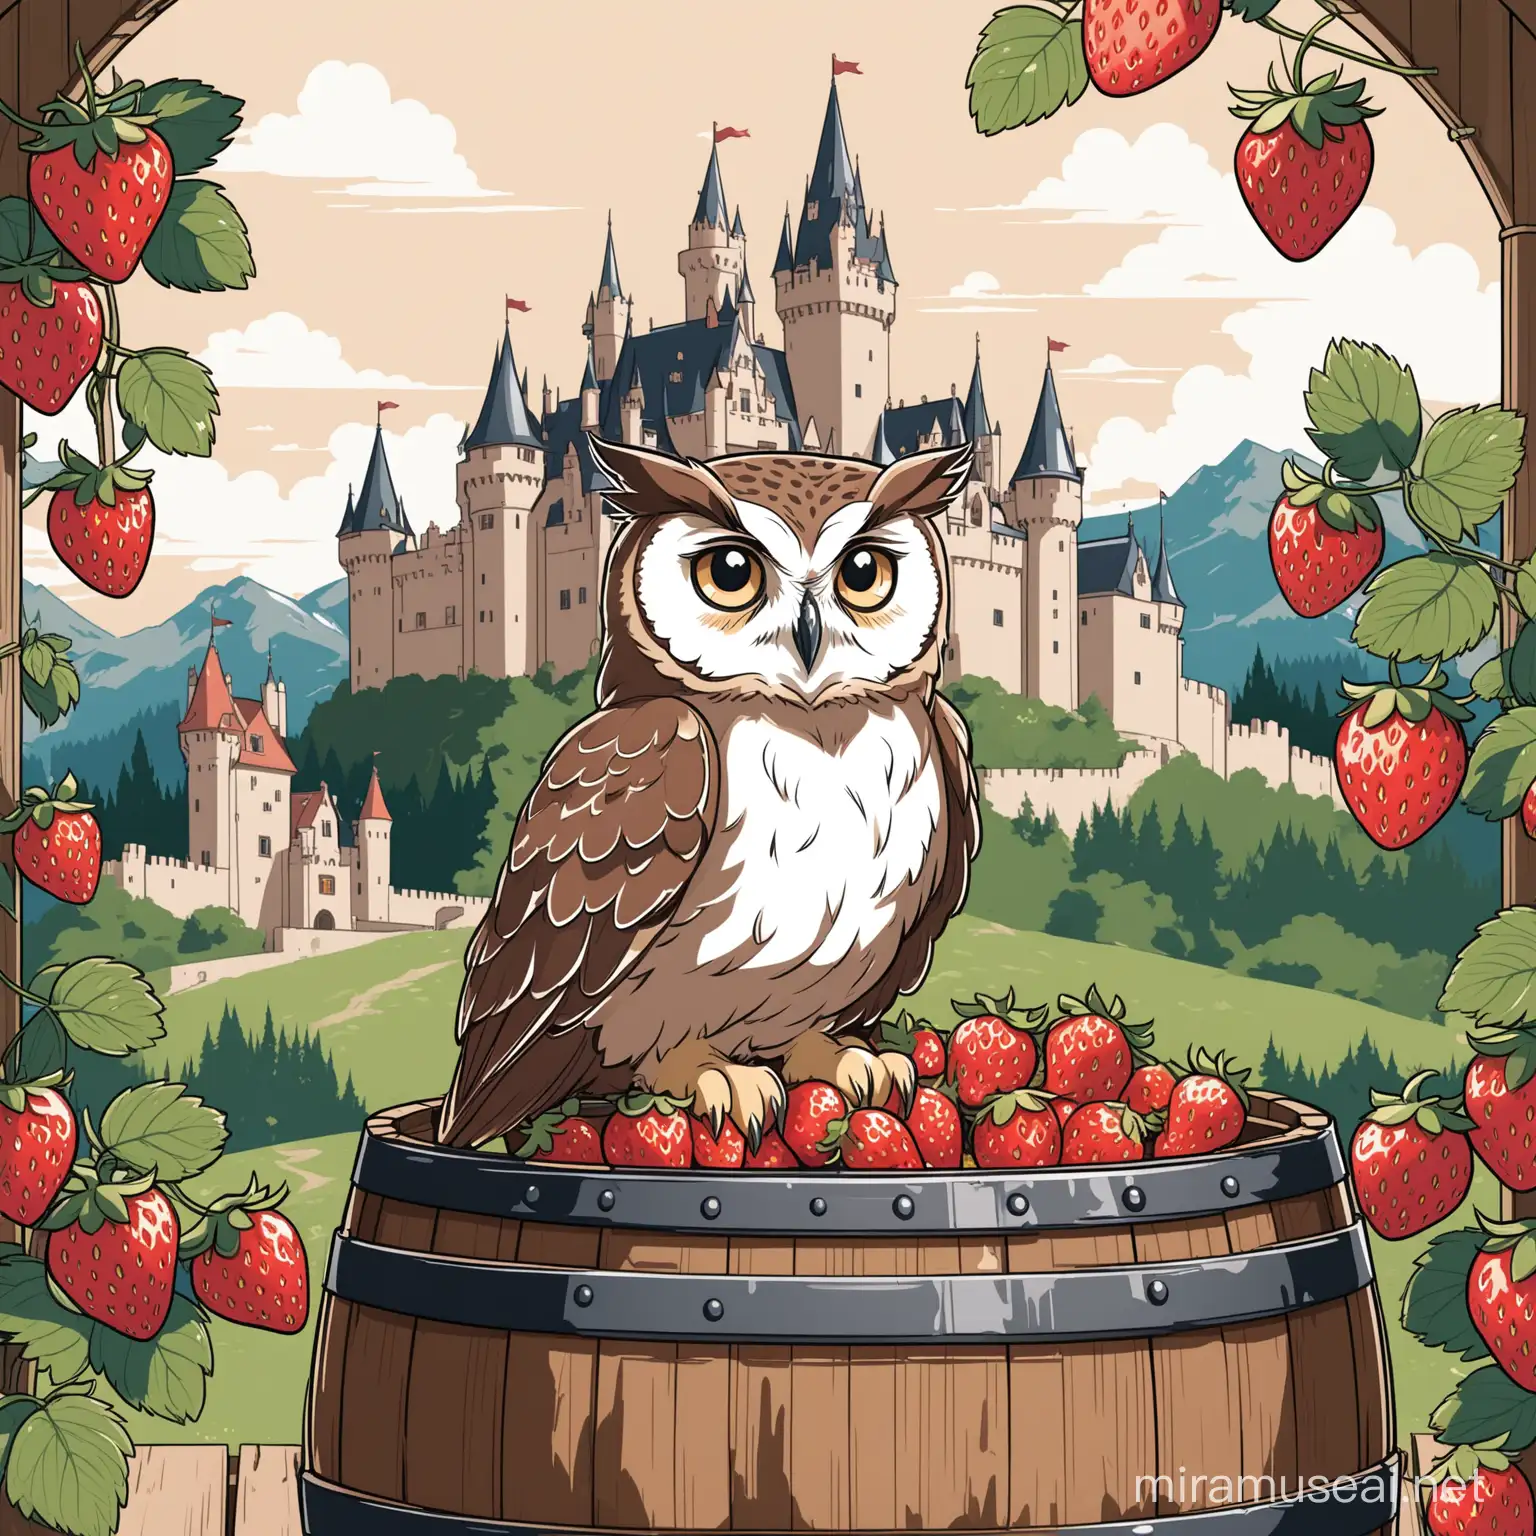 An owl sitting on a whiskey barrel, in front of a castle, with baskets of strawberries, in a simple art style